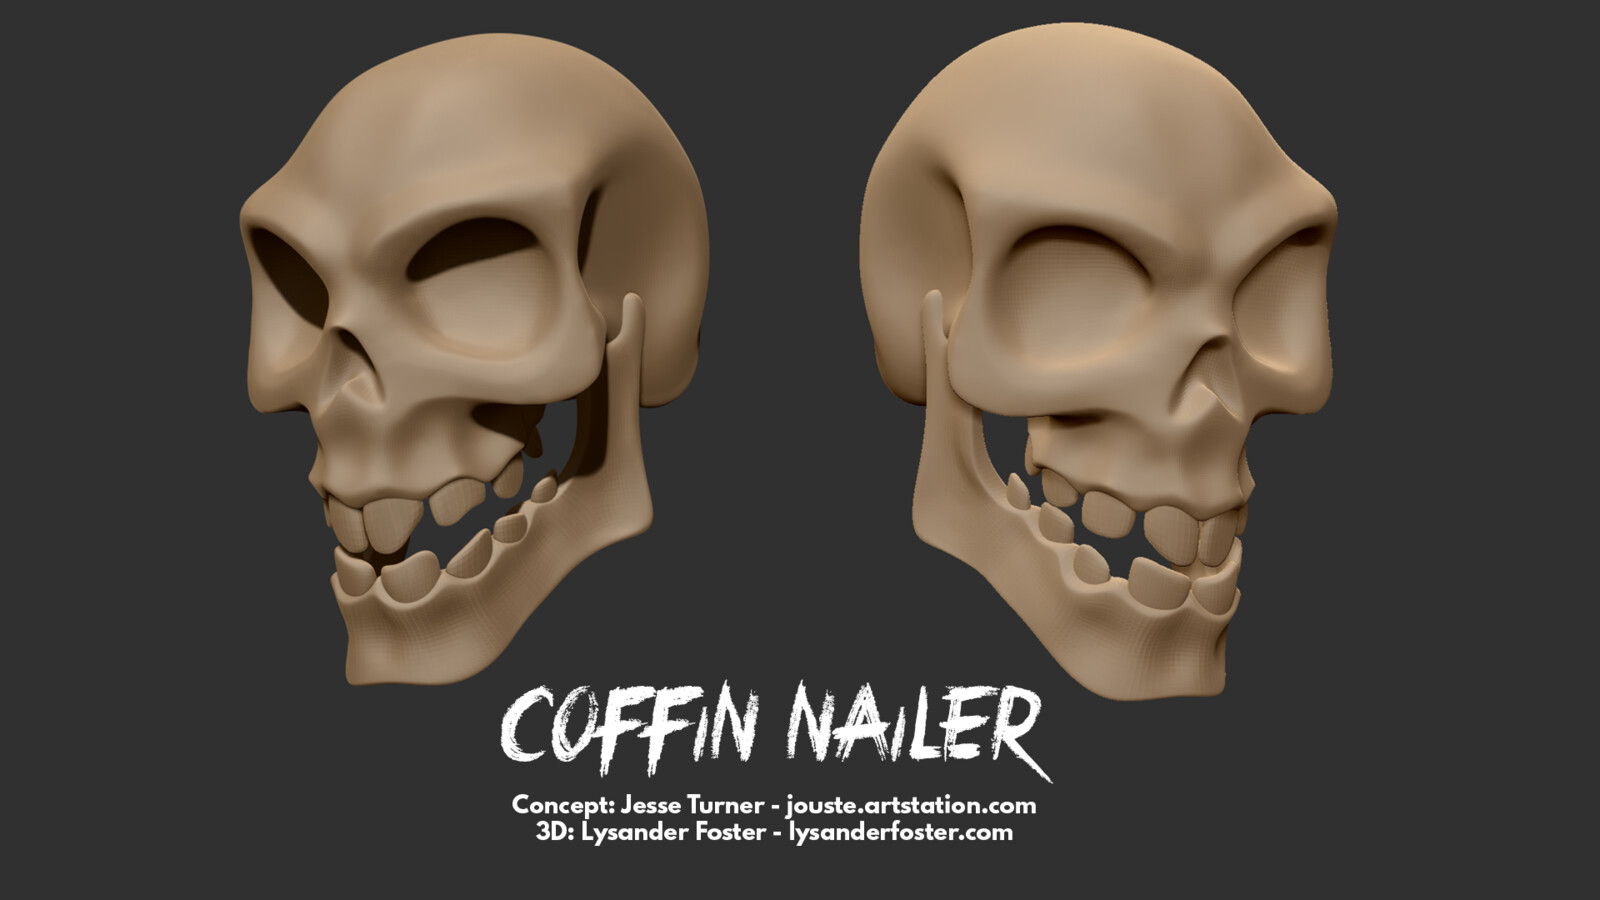 As the skull sculpt came out so nicely, I thought I'd include a render from Zbrush just for it. Starting from a super basic basemesh was helpful, but the lower jaw and seating teeth inside was by far the hardest bit!